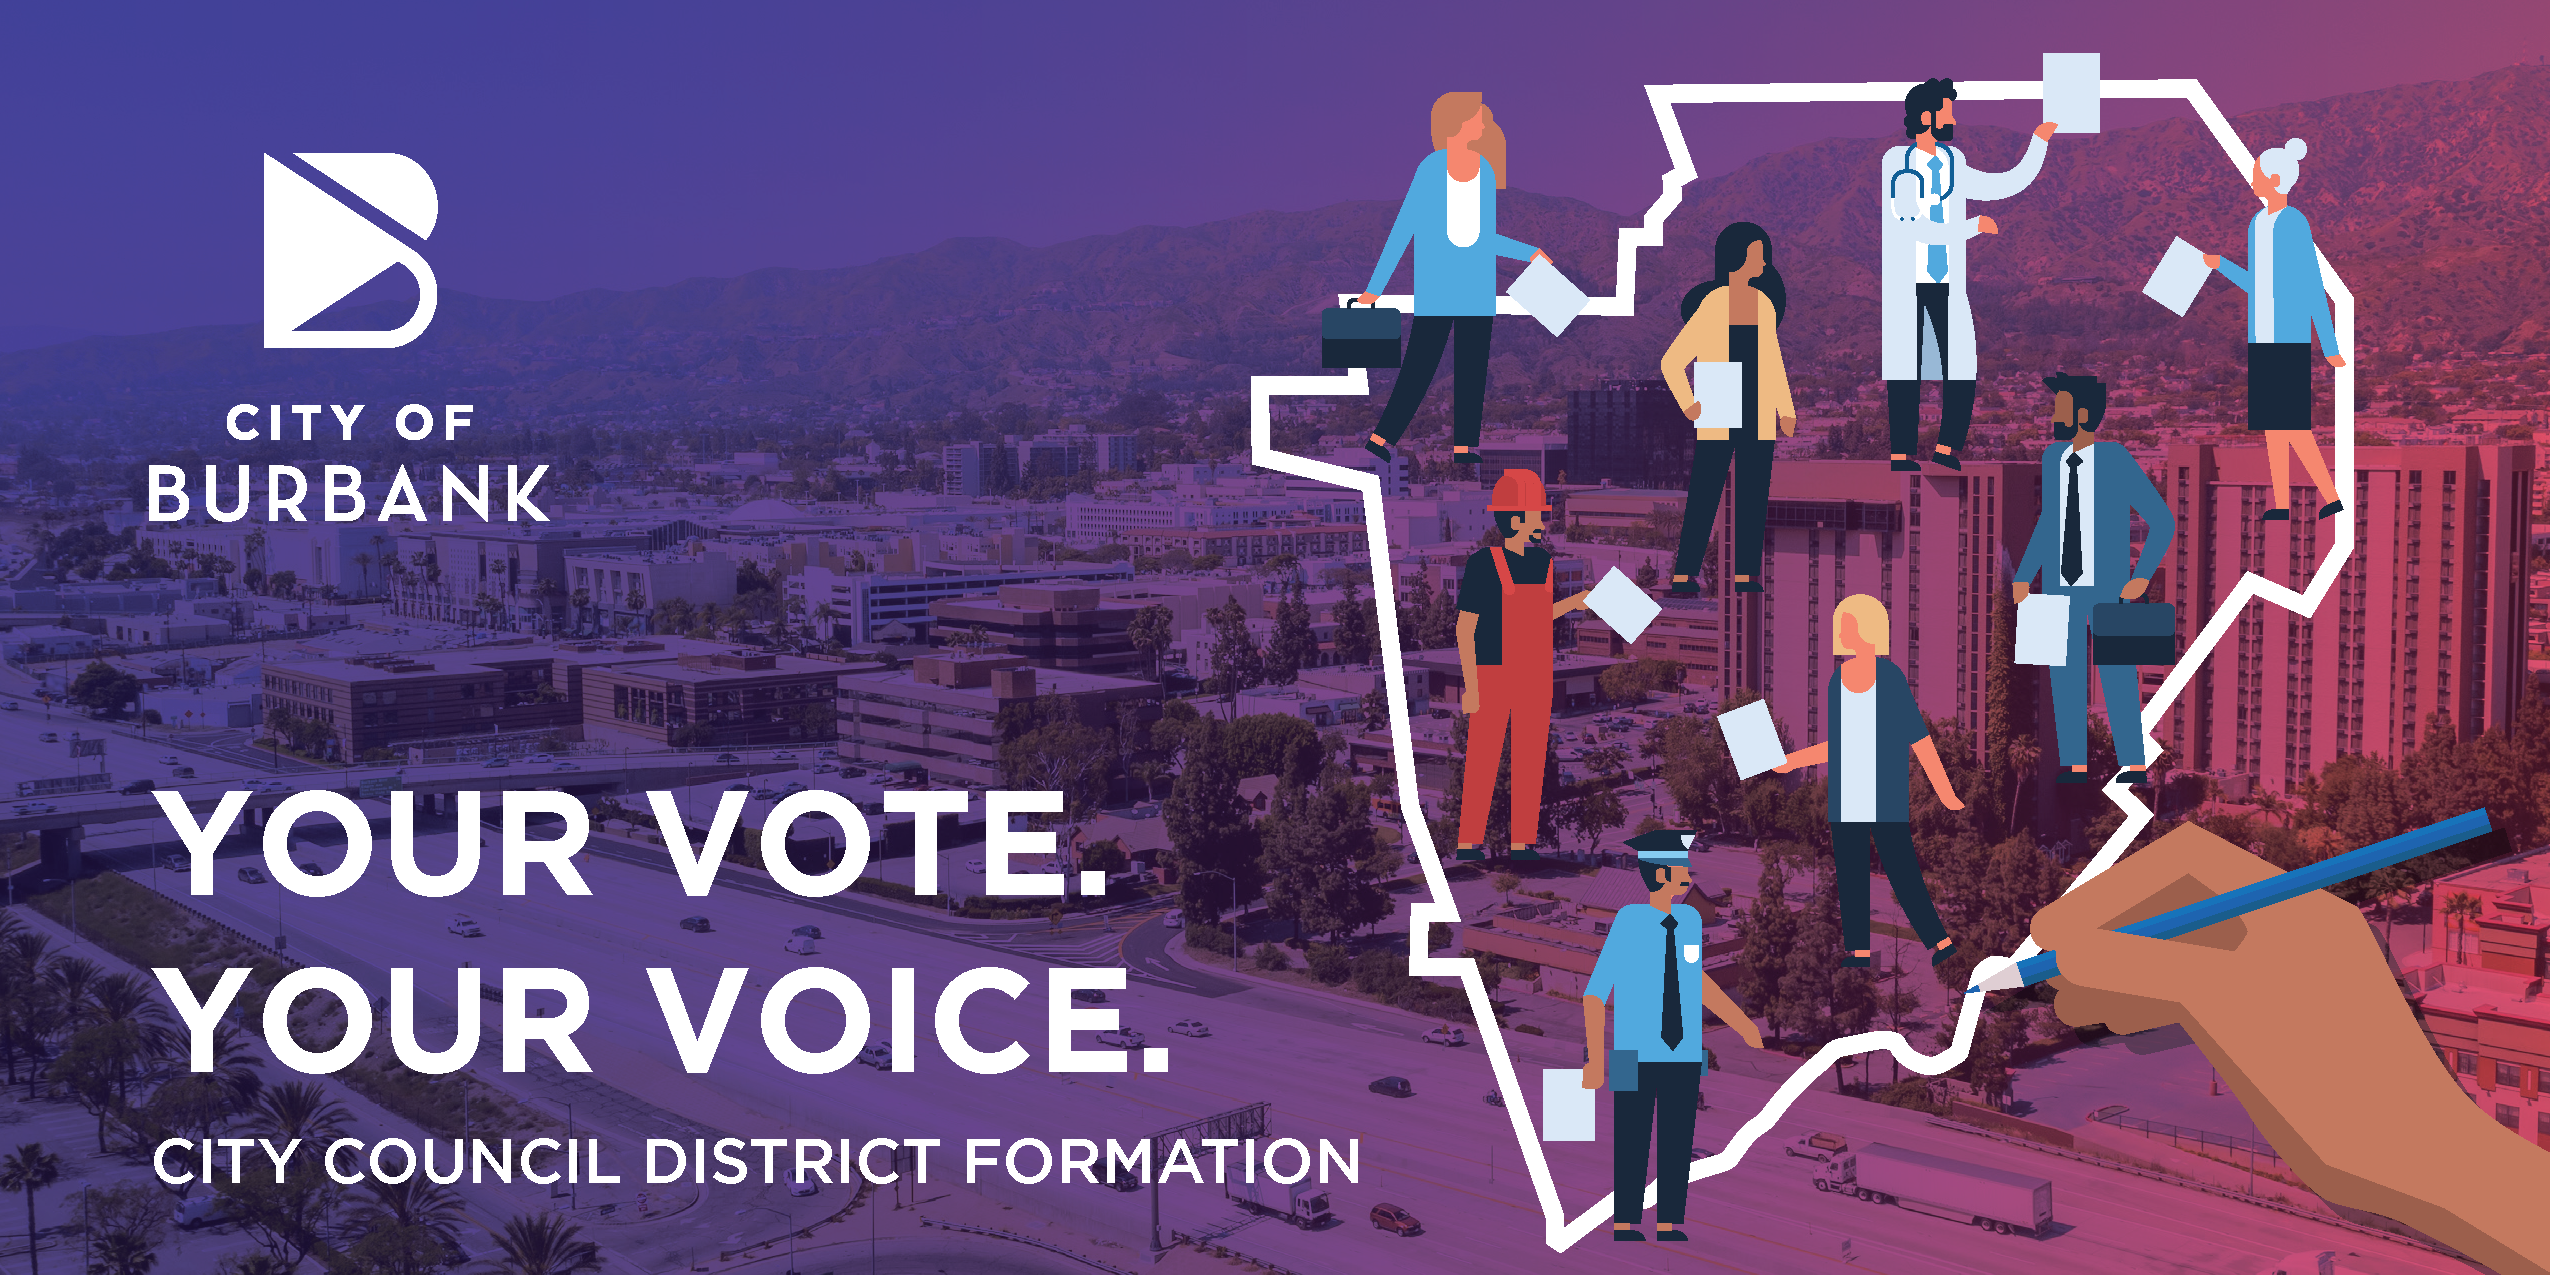 City of Burbank City Council District Formation - Public Hearing #3 of 5